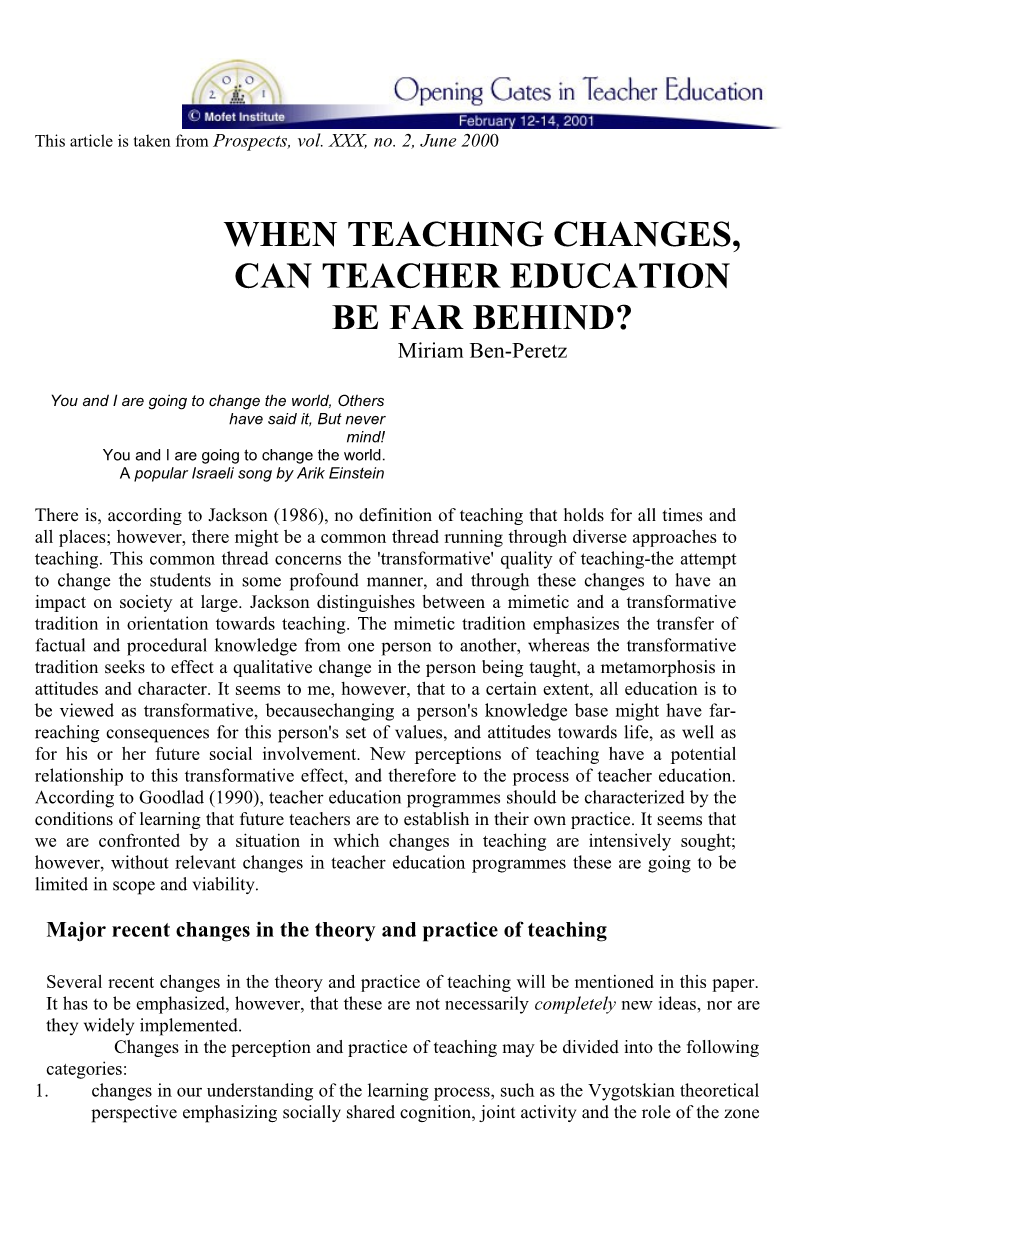 Professionalism in Teaching When Teaching Changes, Can Teacher Education